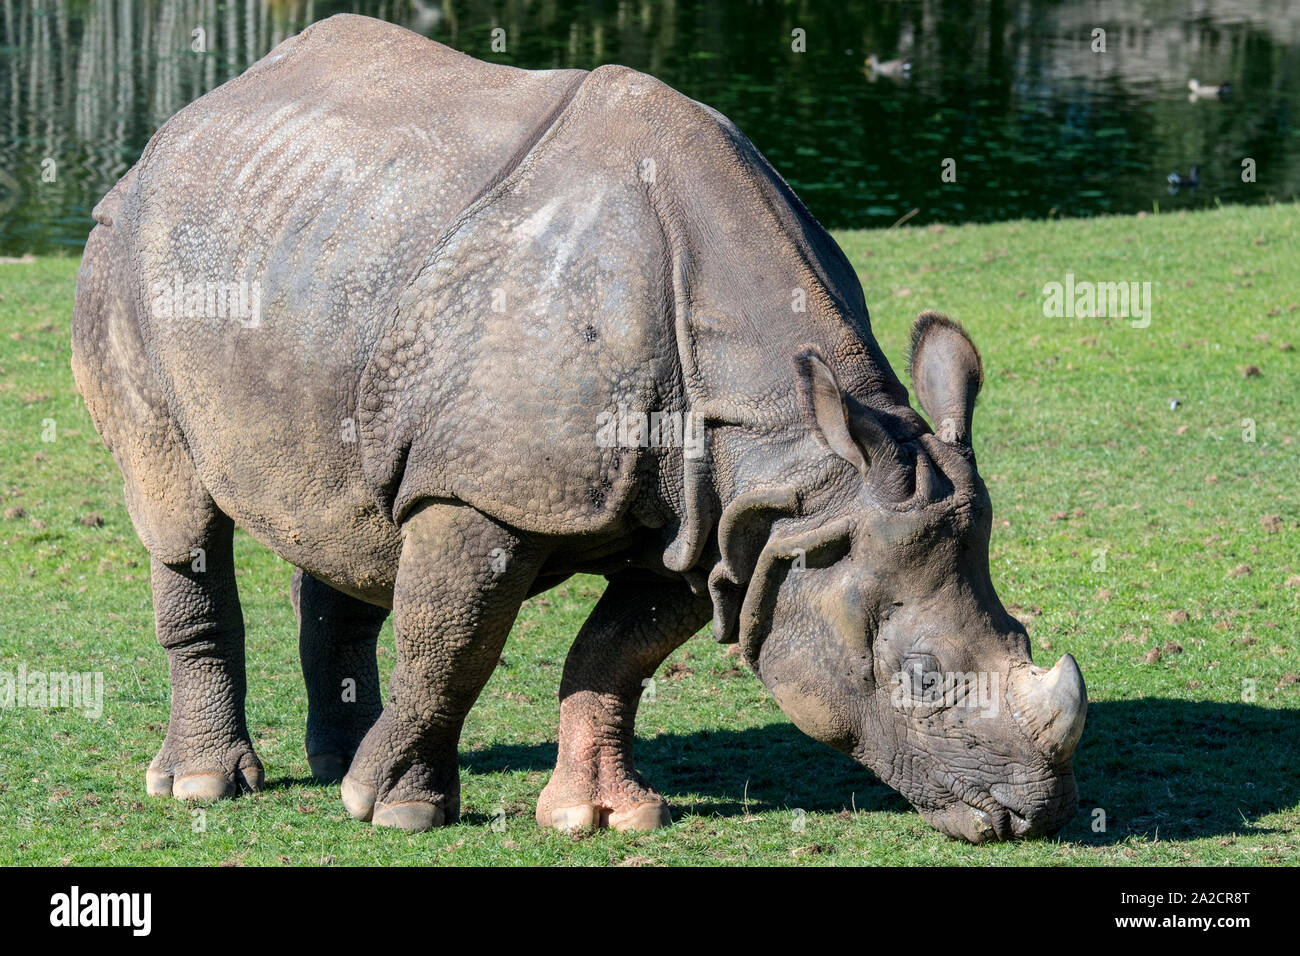 Indian rhinoceros / greater one-horned rhinoceros / great Indian rhinoceros (Rhinoceros unicornis) Stock Photo